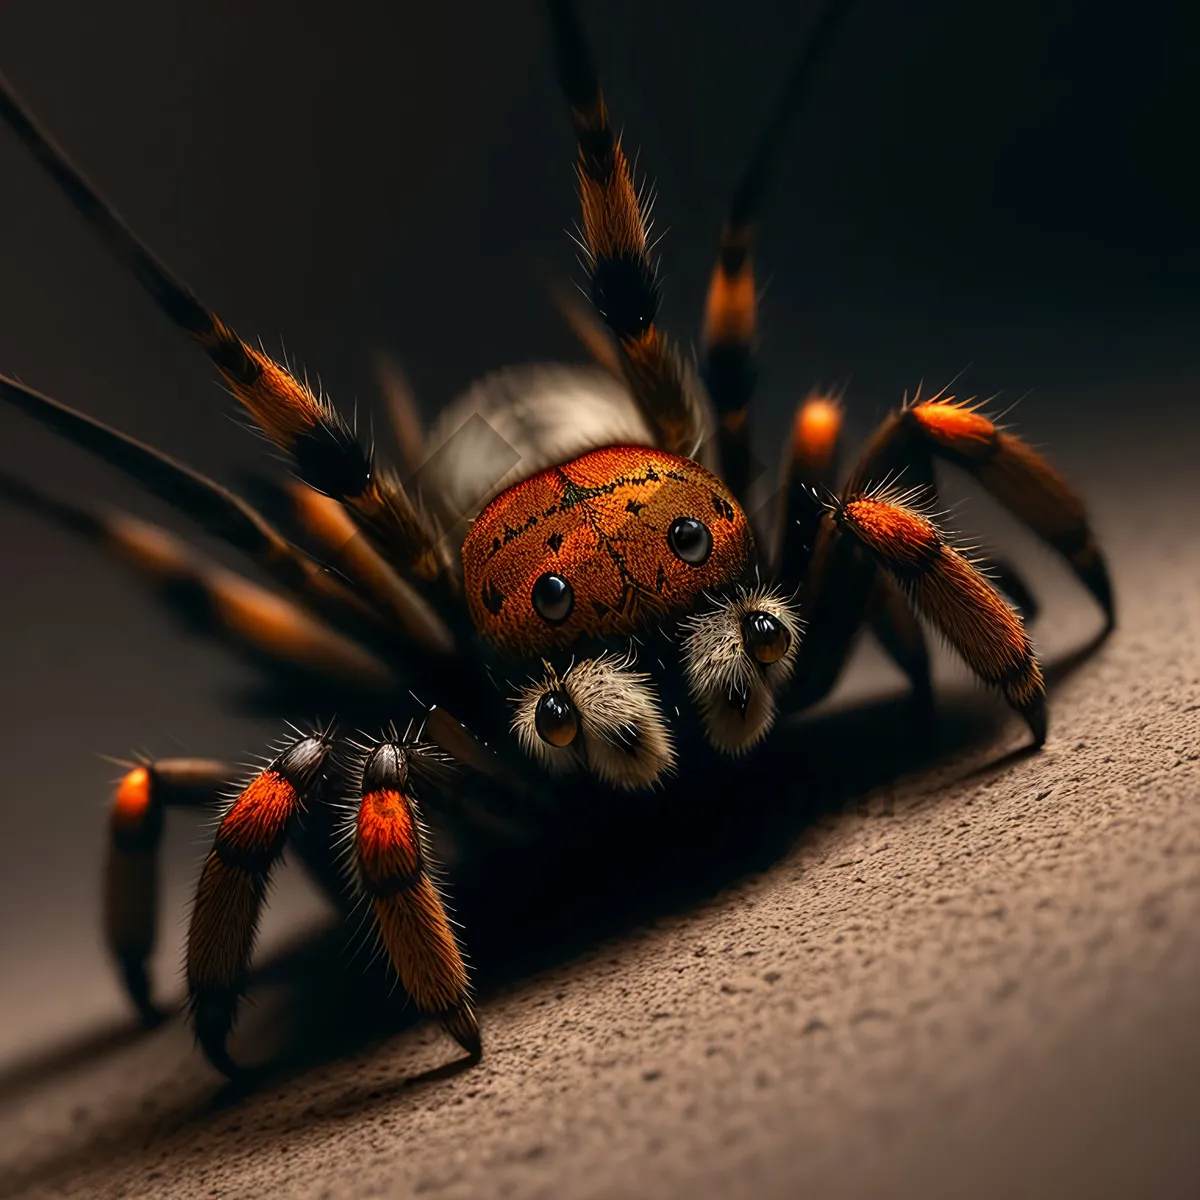 Picture of Close-up of Black Ladybug on Barn Spider: Summer Wildlife